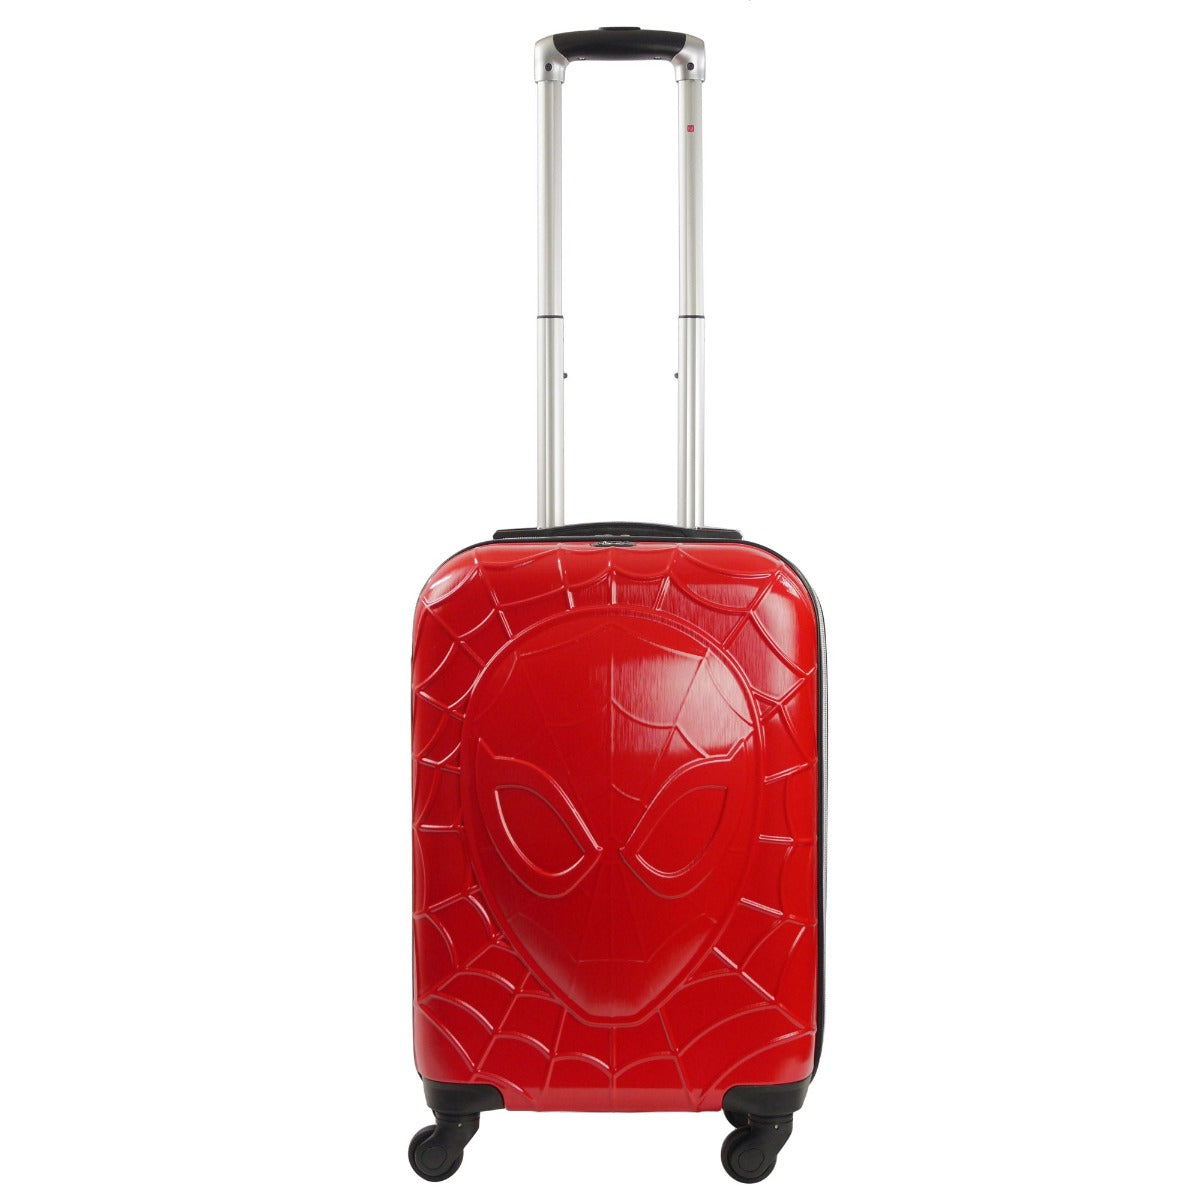 Marvel Ful Molded Spiderman 4 Wheel Spinner 23 inch Carry on Hard Sided Luggage